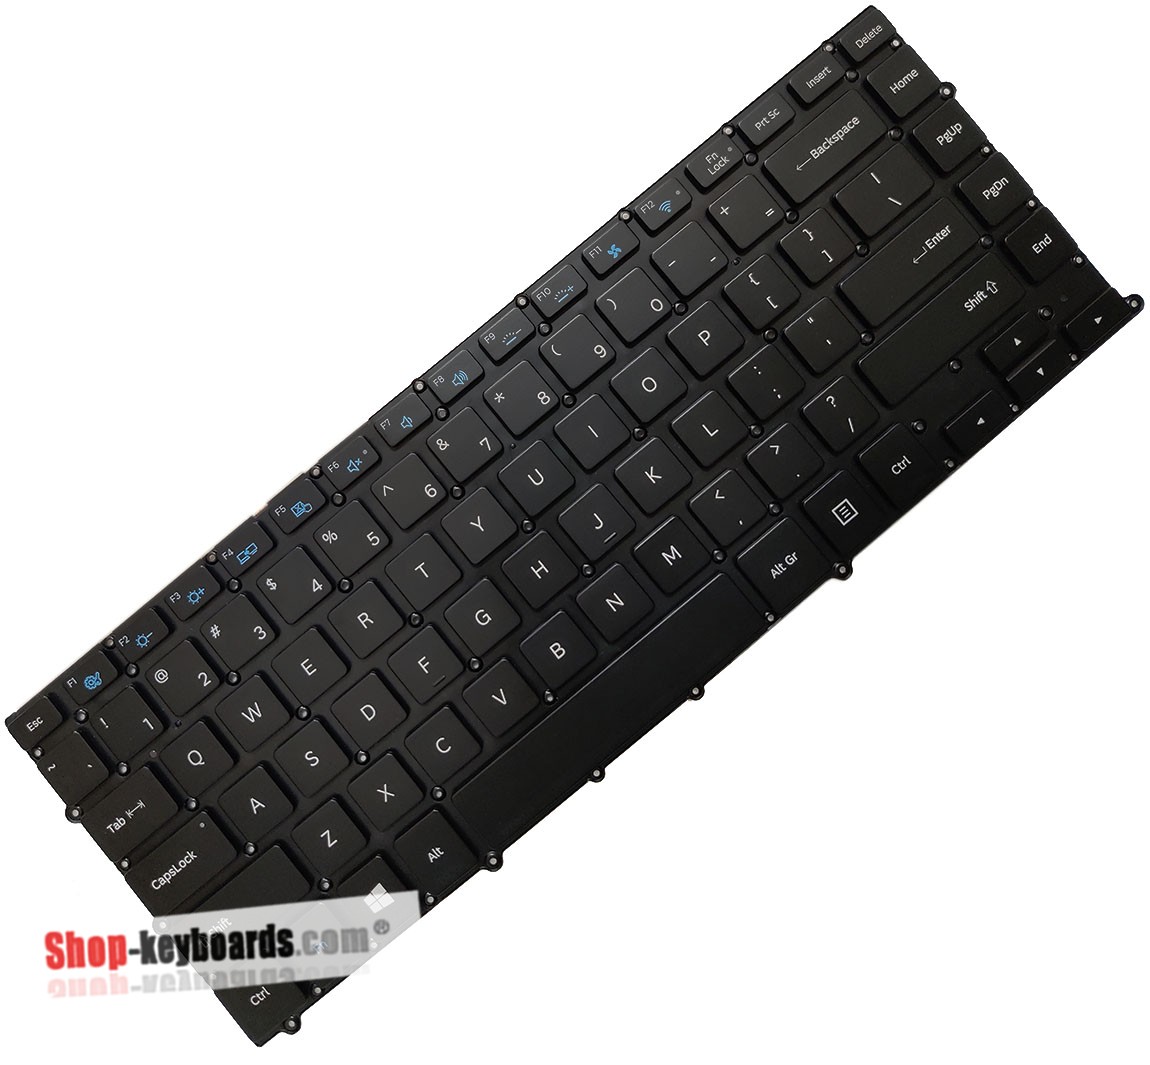 Samsung NT900X4C-A58A  Keyboard replacement